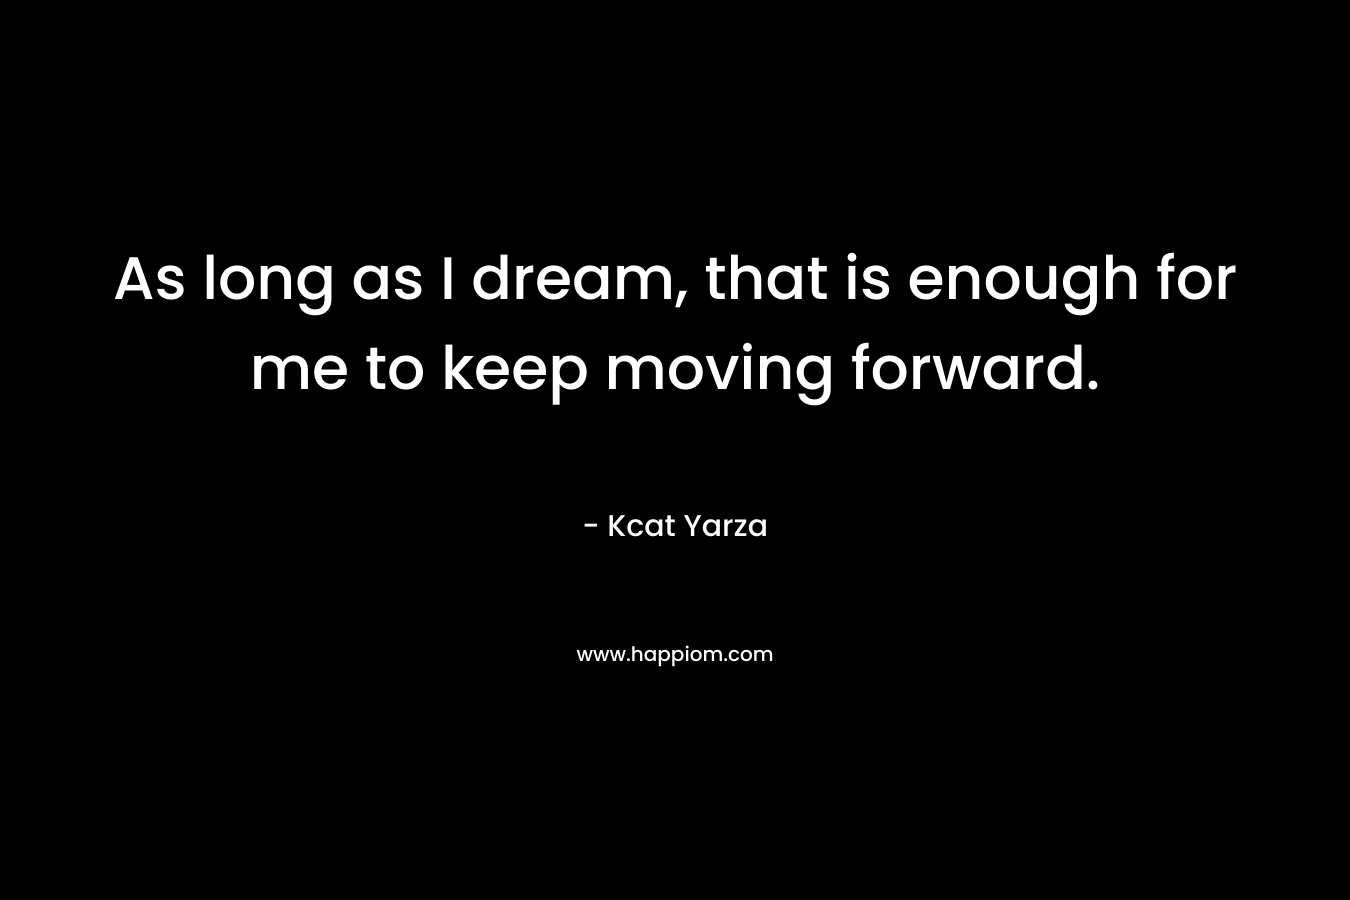 As long as I dream, that is enough for me to keep moving forward.